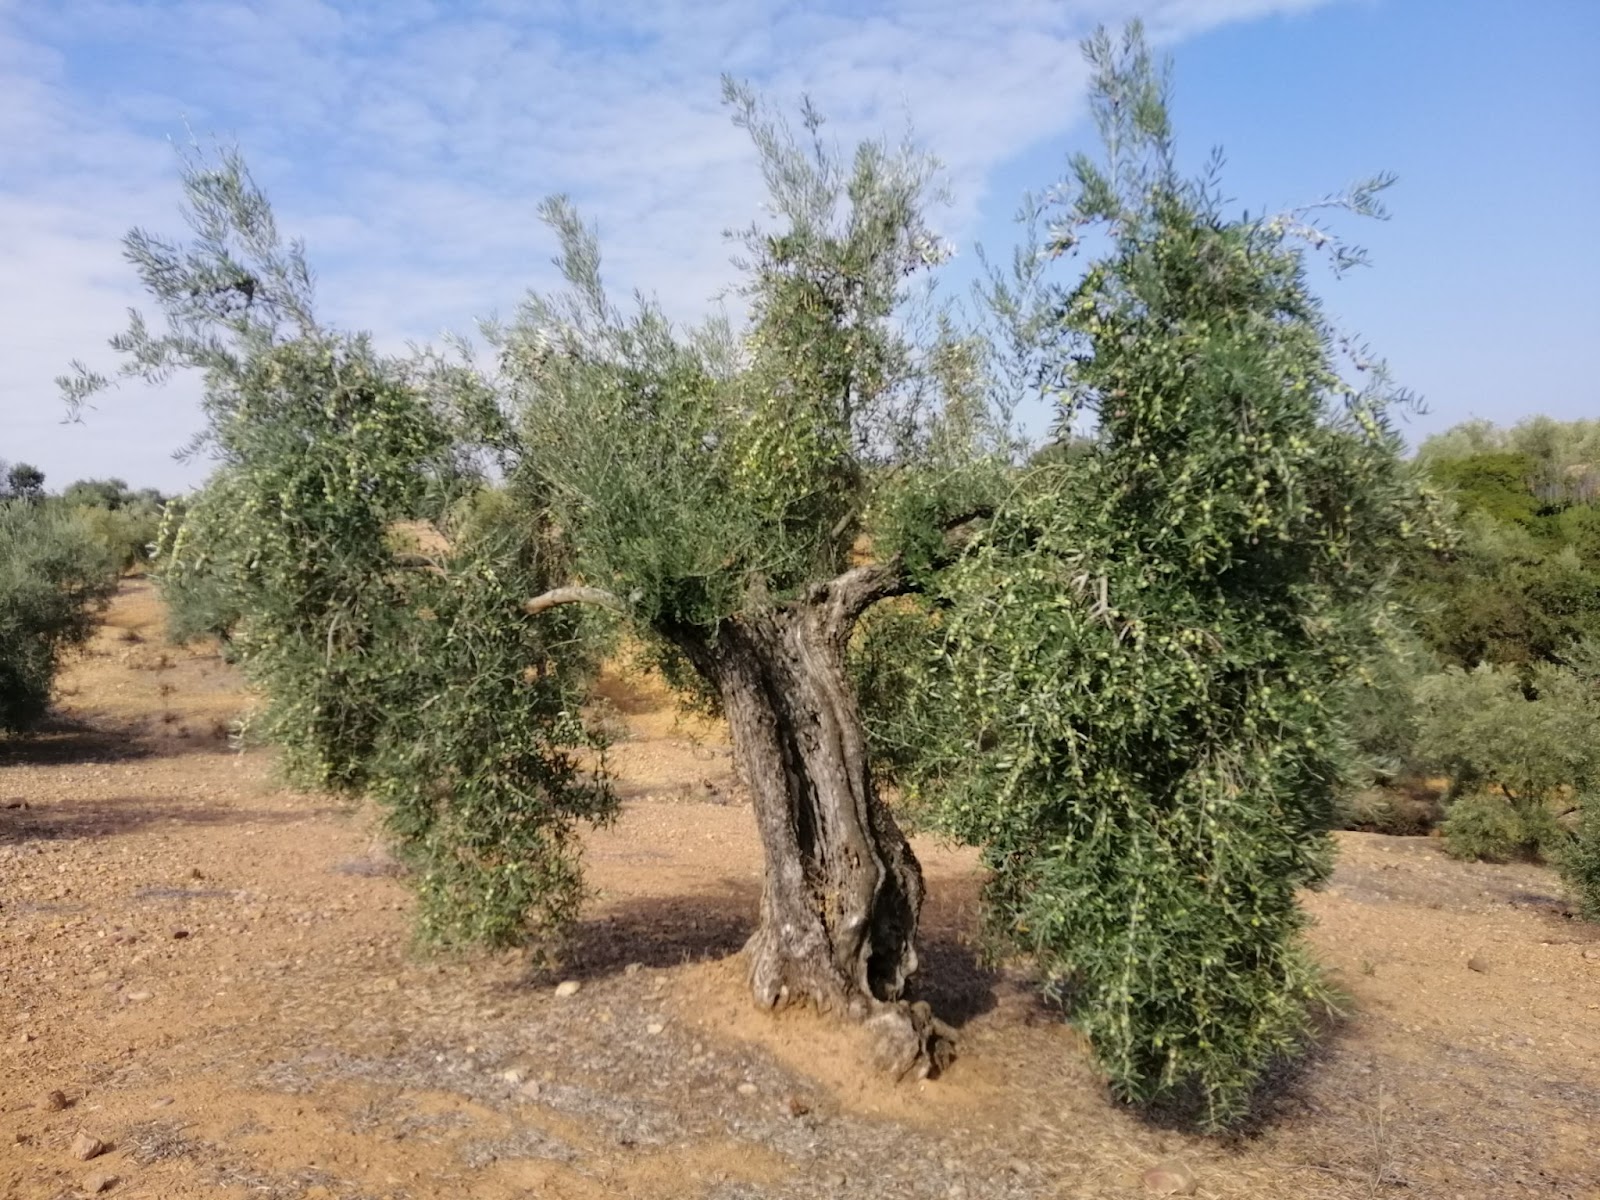 Olive tree with low crown density, which makes the survival and expansion of the repilo very difficult.